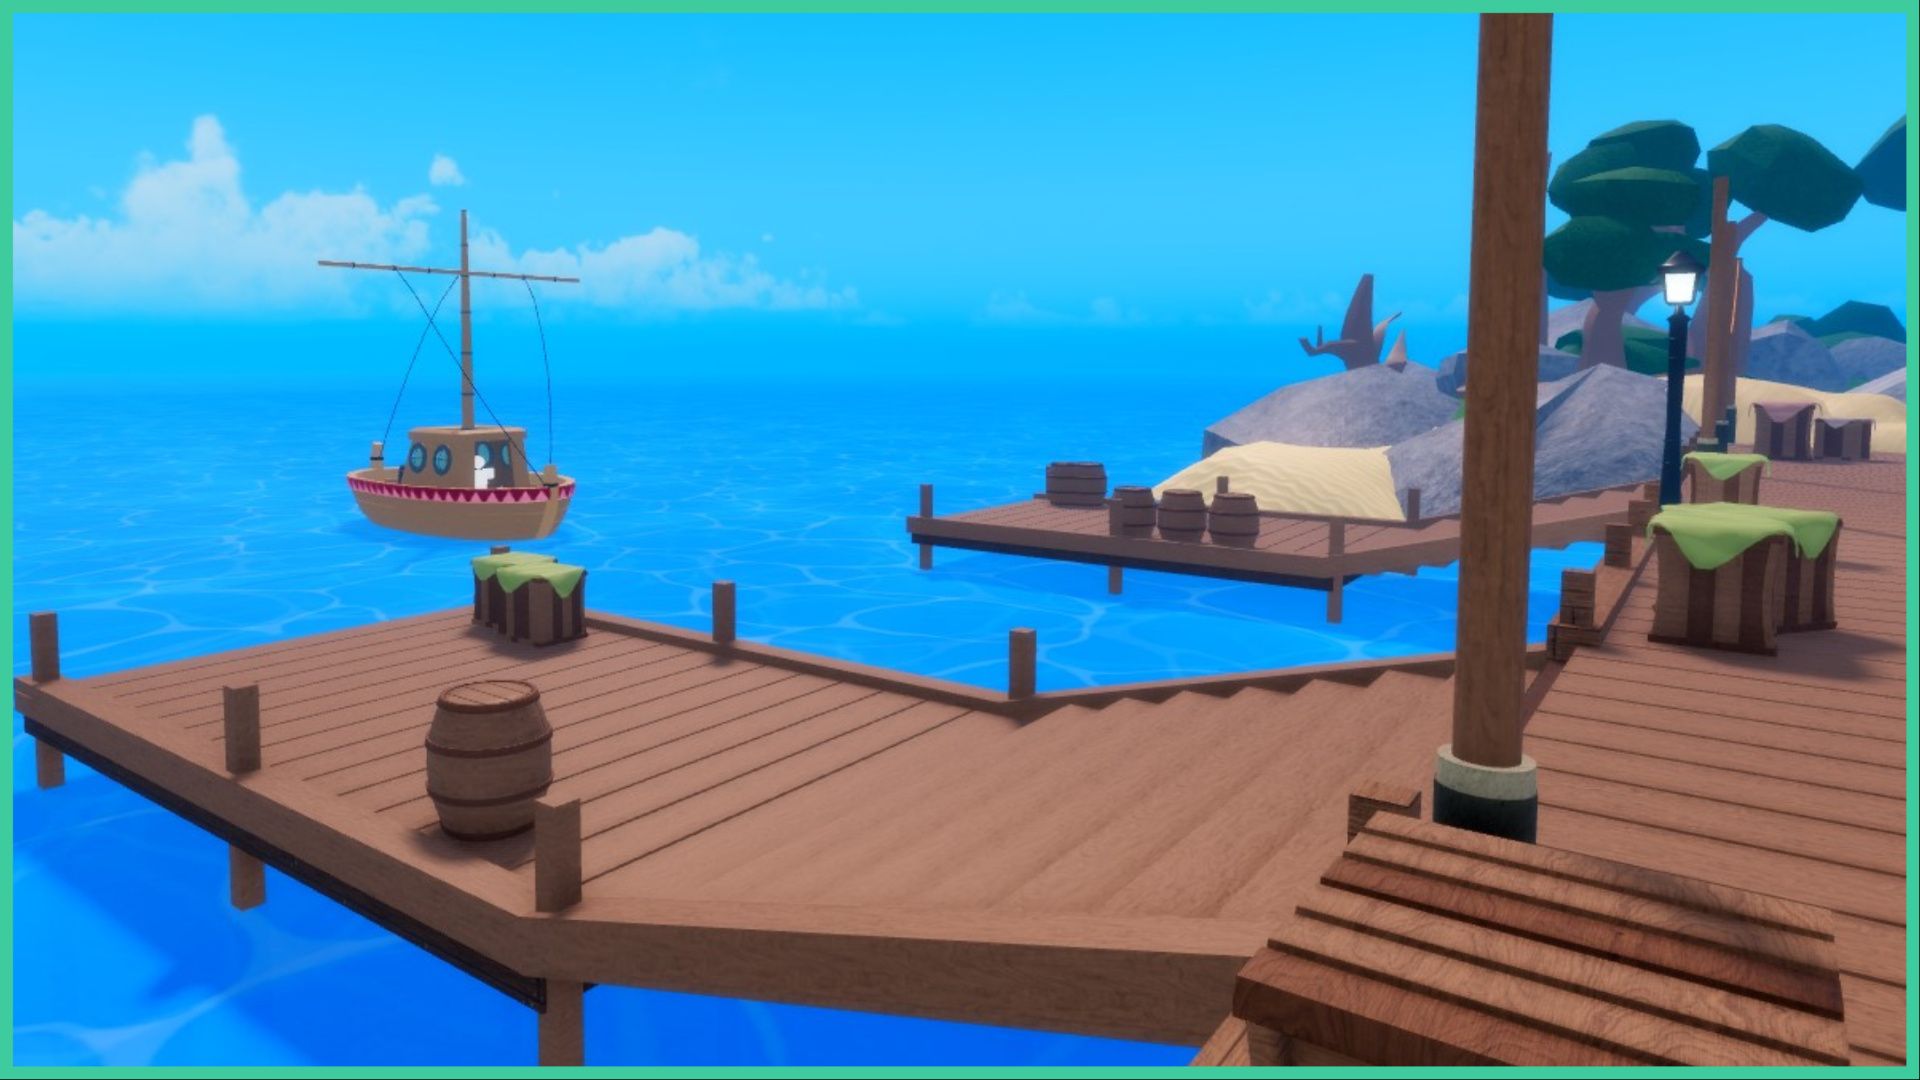 feature image for our legacy piece race tier list, the screenshot is of a boat sailing to the wooden dock, where there are wooden barrels, and crates, with a streetlamp on the dock to light the area up, the ocean water ripples under the dock and boat, with faint clouds in the sky in the distance, to the right of the image is sand and rocks, with trees